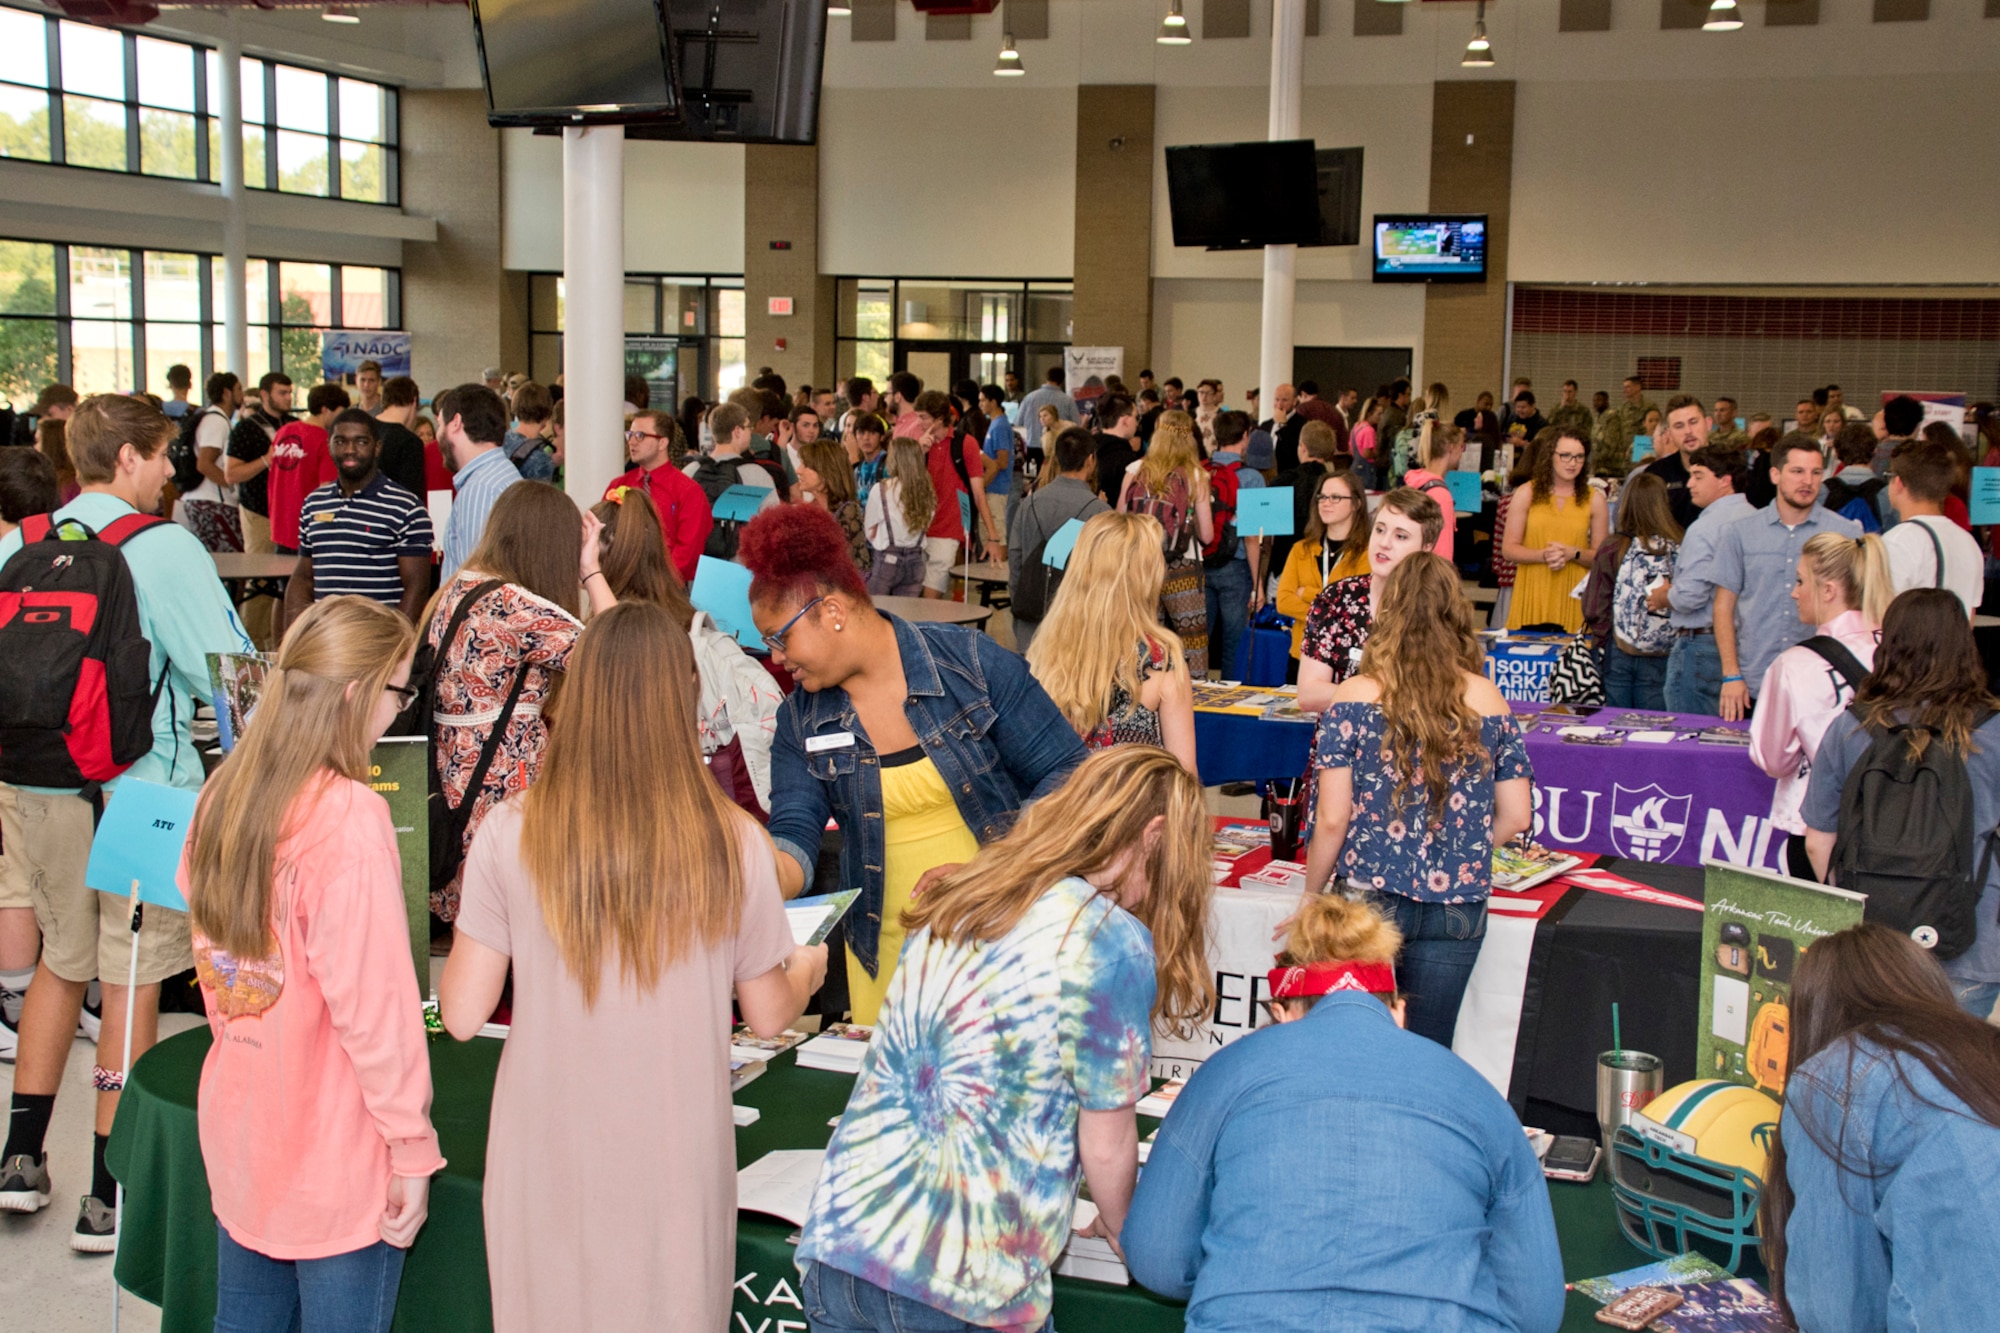 High school students gather information for future careers during the annual Cabot College and Career Fair at Cabot High School in Cabot, Ark., Sept. 28, 2017. Career Fairs allow students to converse with potential future employers and start considering career paths. (U.S. Air Force photo by Master Sgt. Jeff Walston/Released)